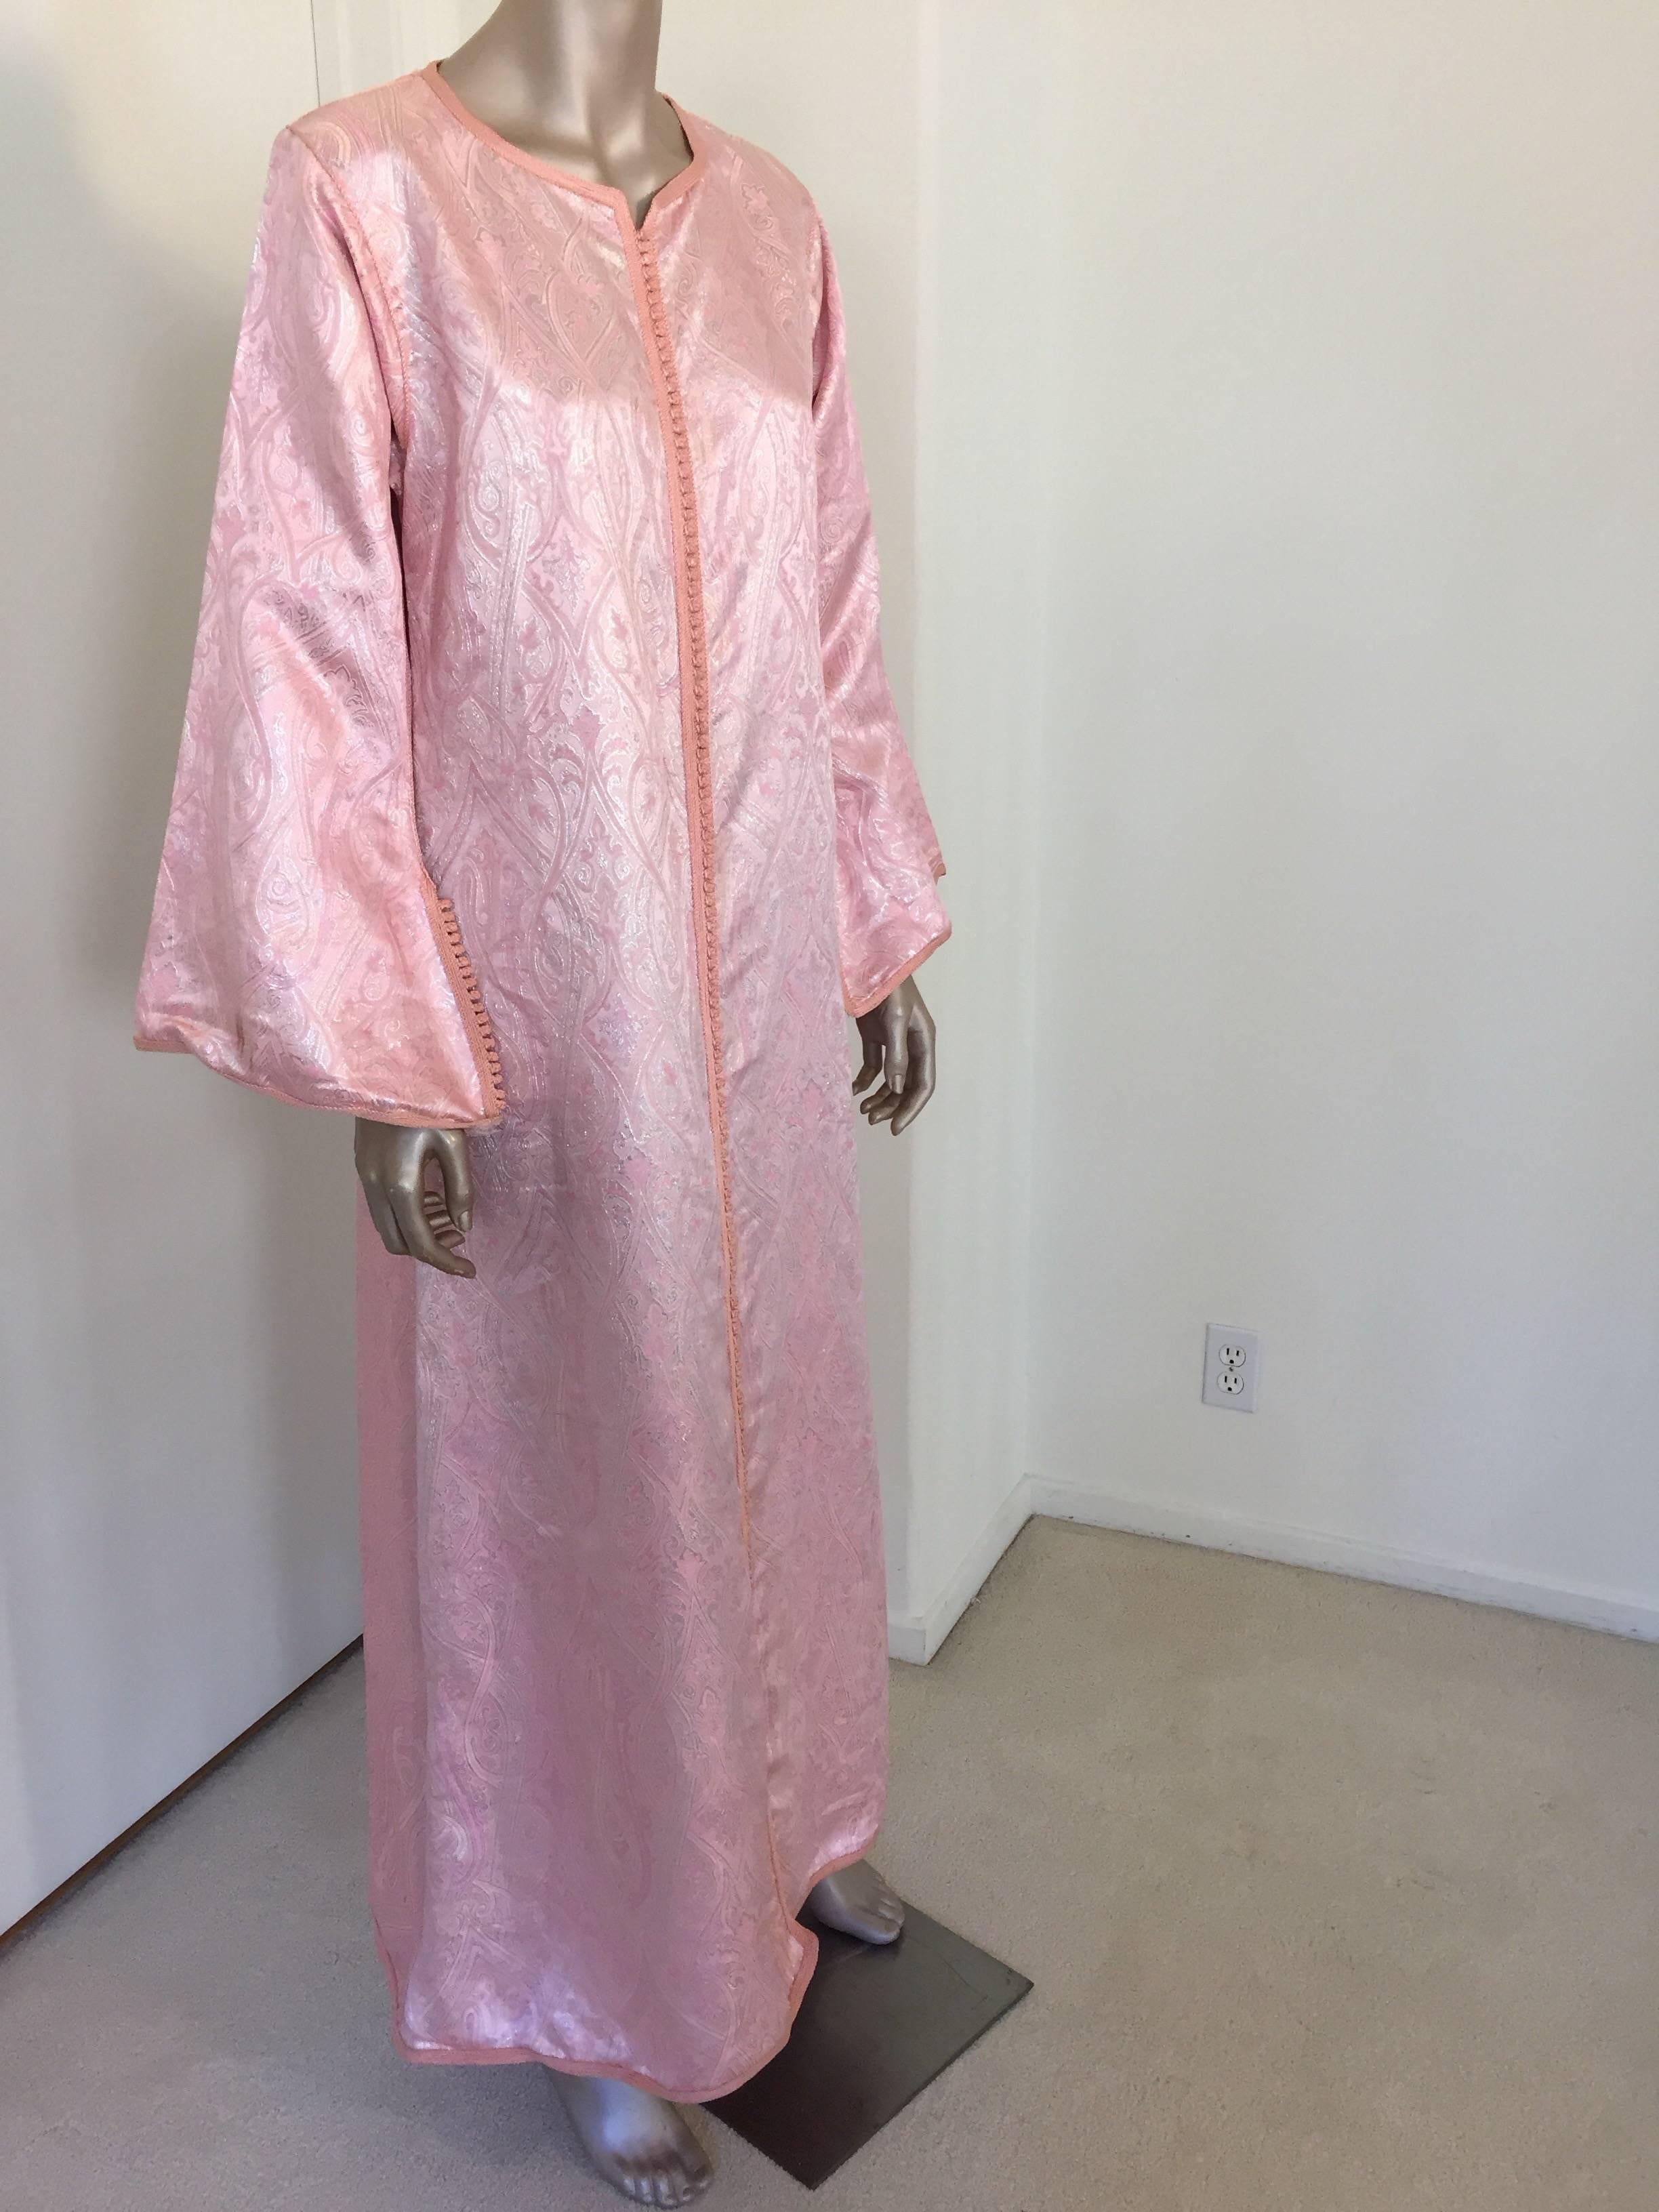 Moroccan caftan in metallic pink and silver brocade maxi dress kaftan handmade by Moroccan artist.
Handcrafted vintage exotic 1970s pink metallic brocade ceremonial caftan gown from North Africa, Morocco.
The luminous brocade fabric shimmers with